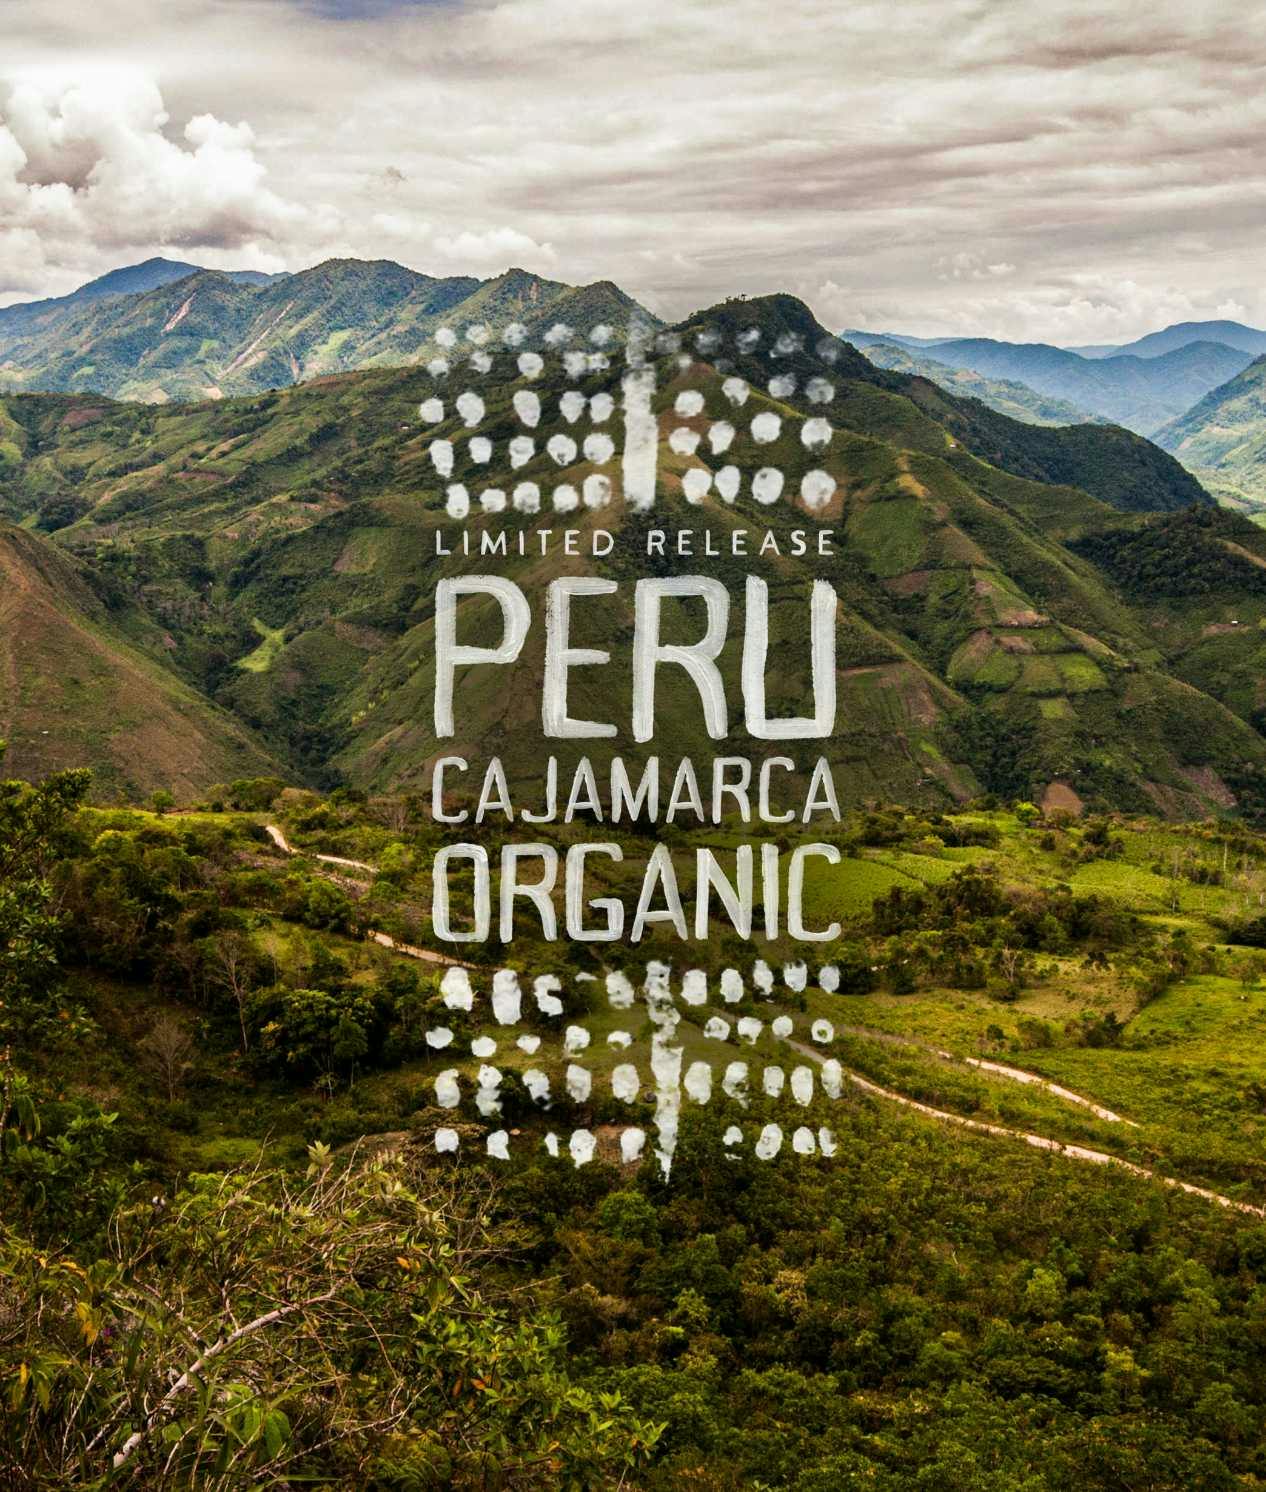 Be Organic Colombia